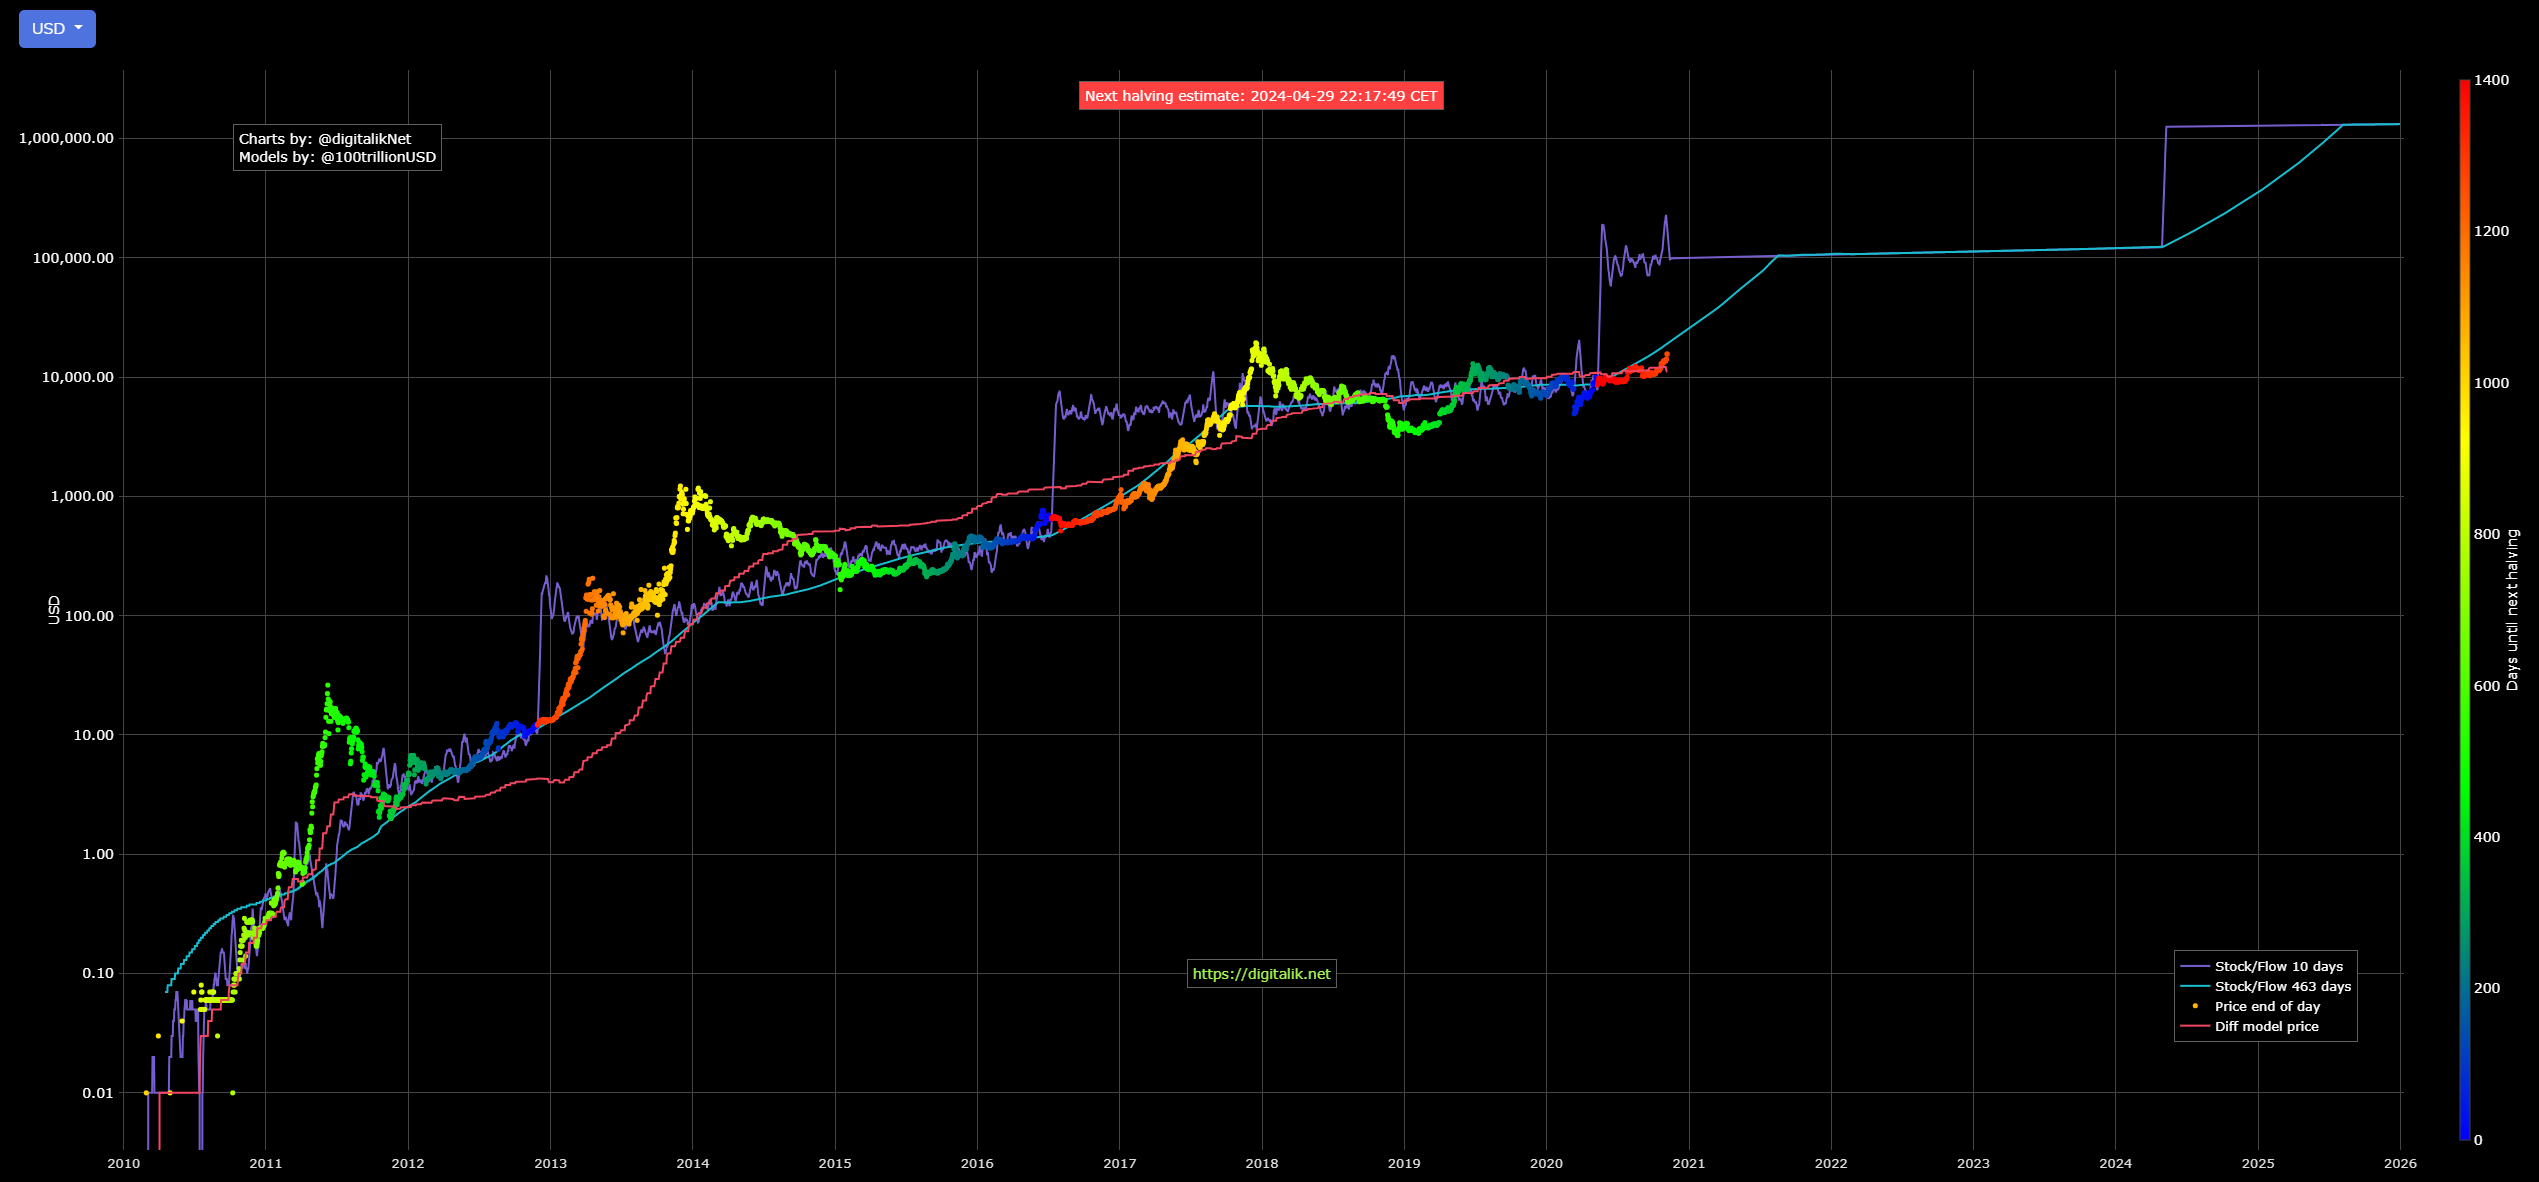 BTC/USD price prediction based on the stock to flow model